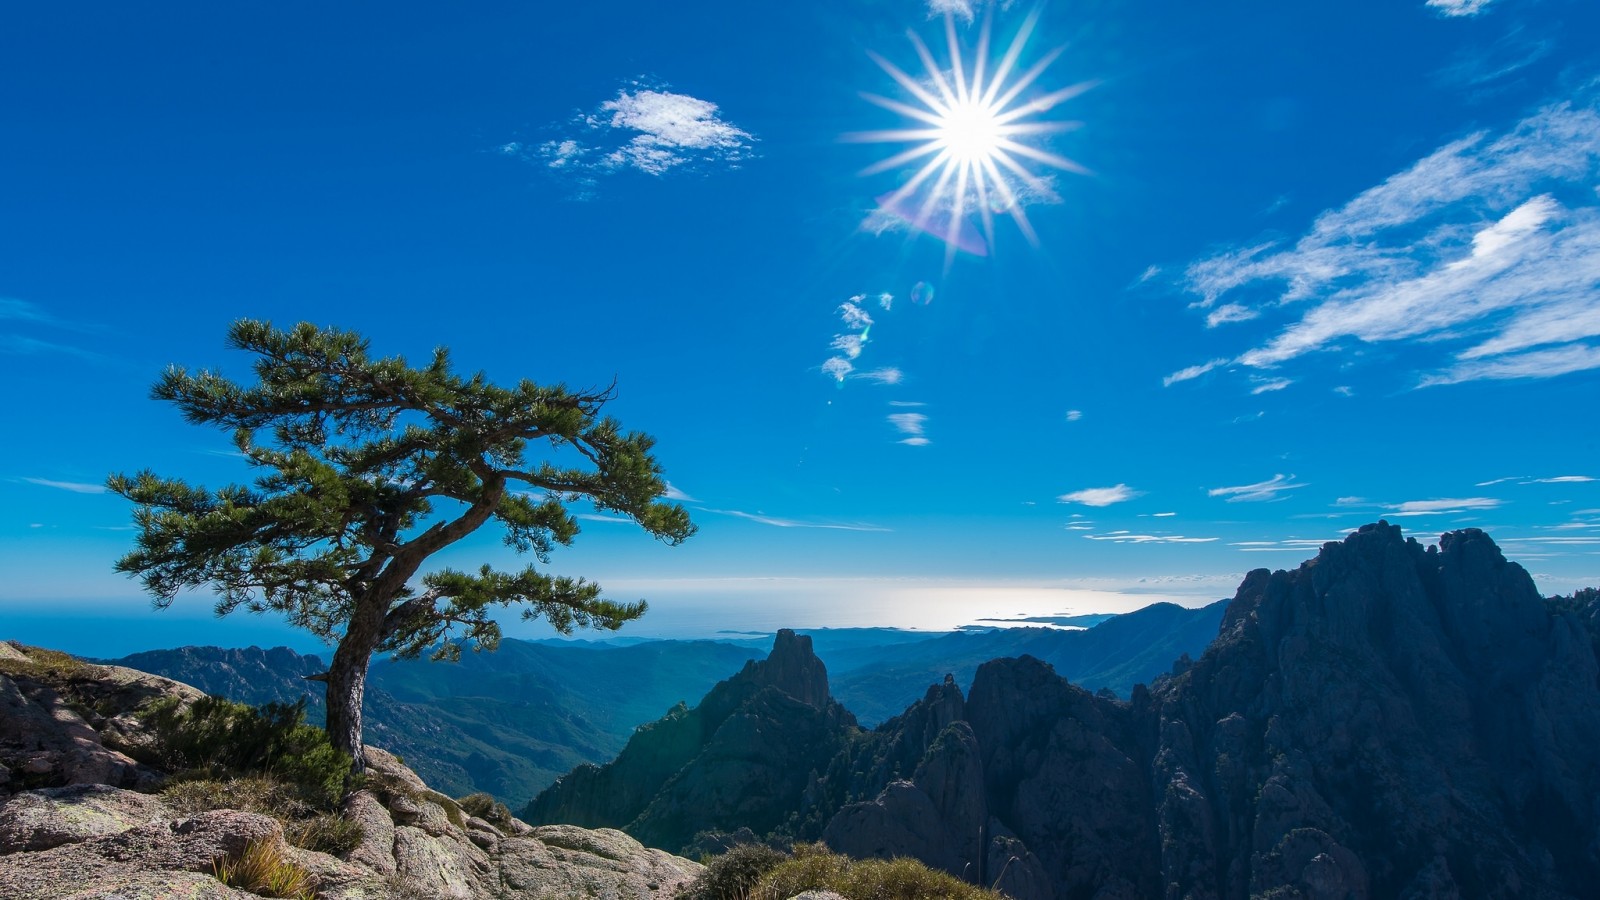 Sun Shining on Mountains in Corsica, France by christophe MELCHERS